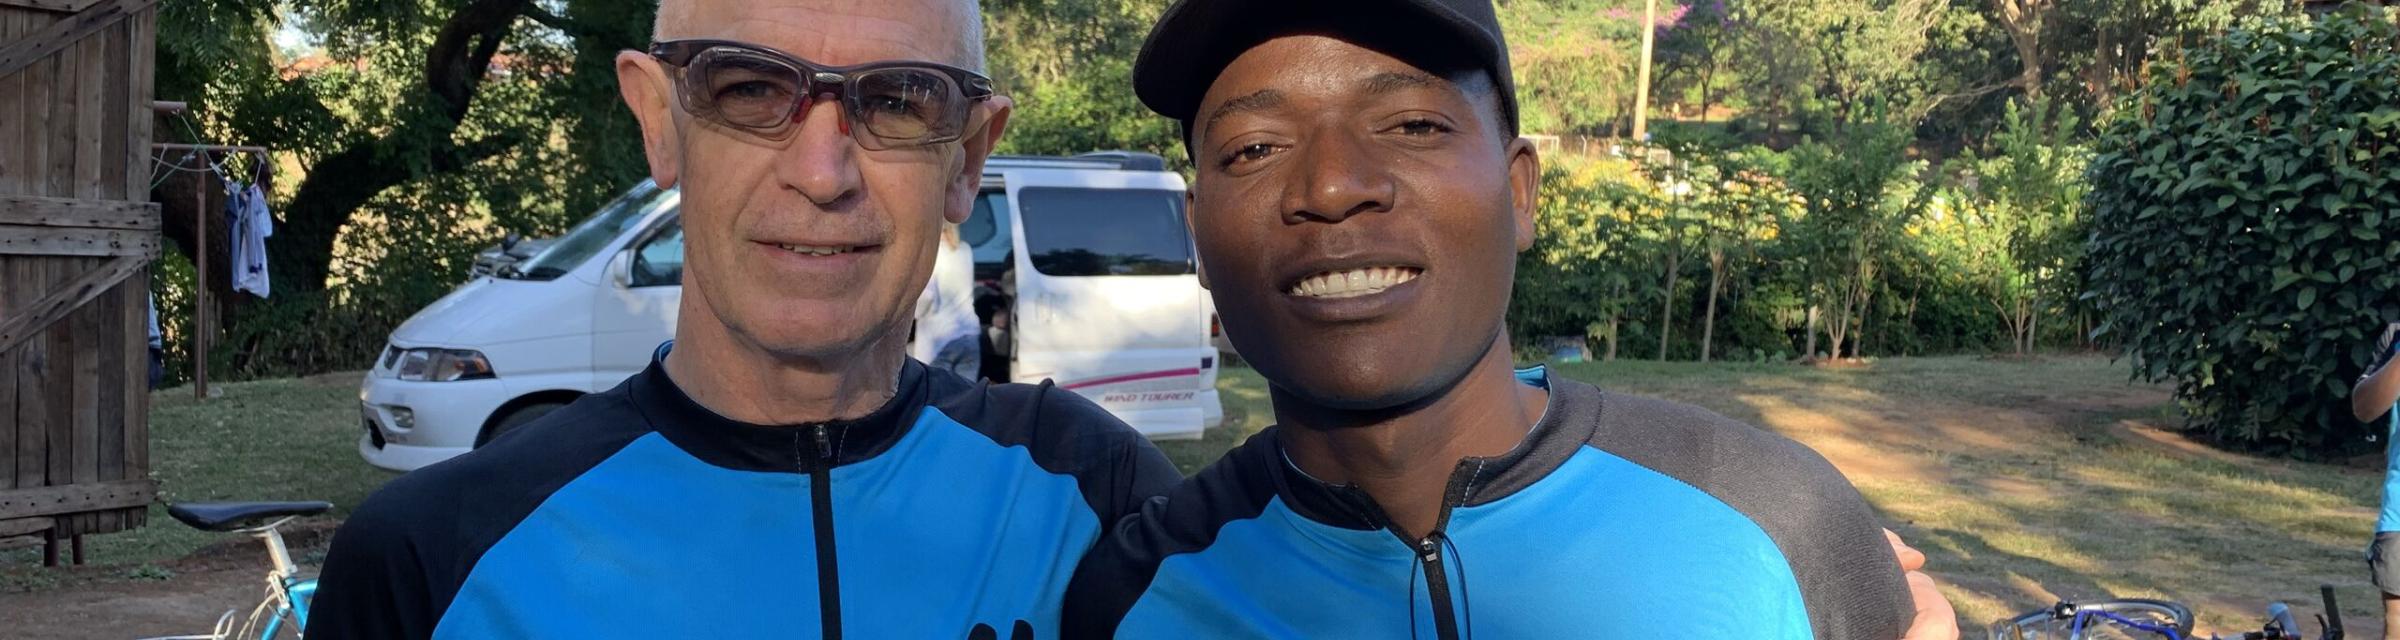 Van Zyl during Ride 2 Transform Malawi (R2TM). R2TM is a seven-day cycling trip through Malawi with the purpose of praying for and ministering to the unreached people groups living there.